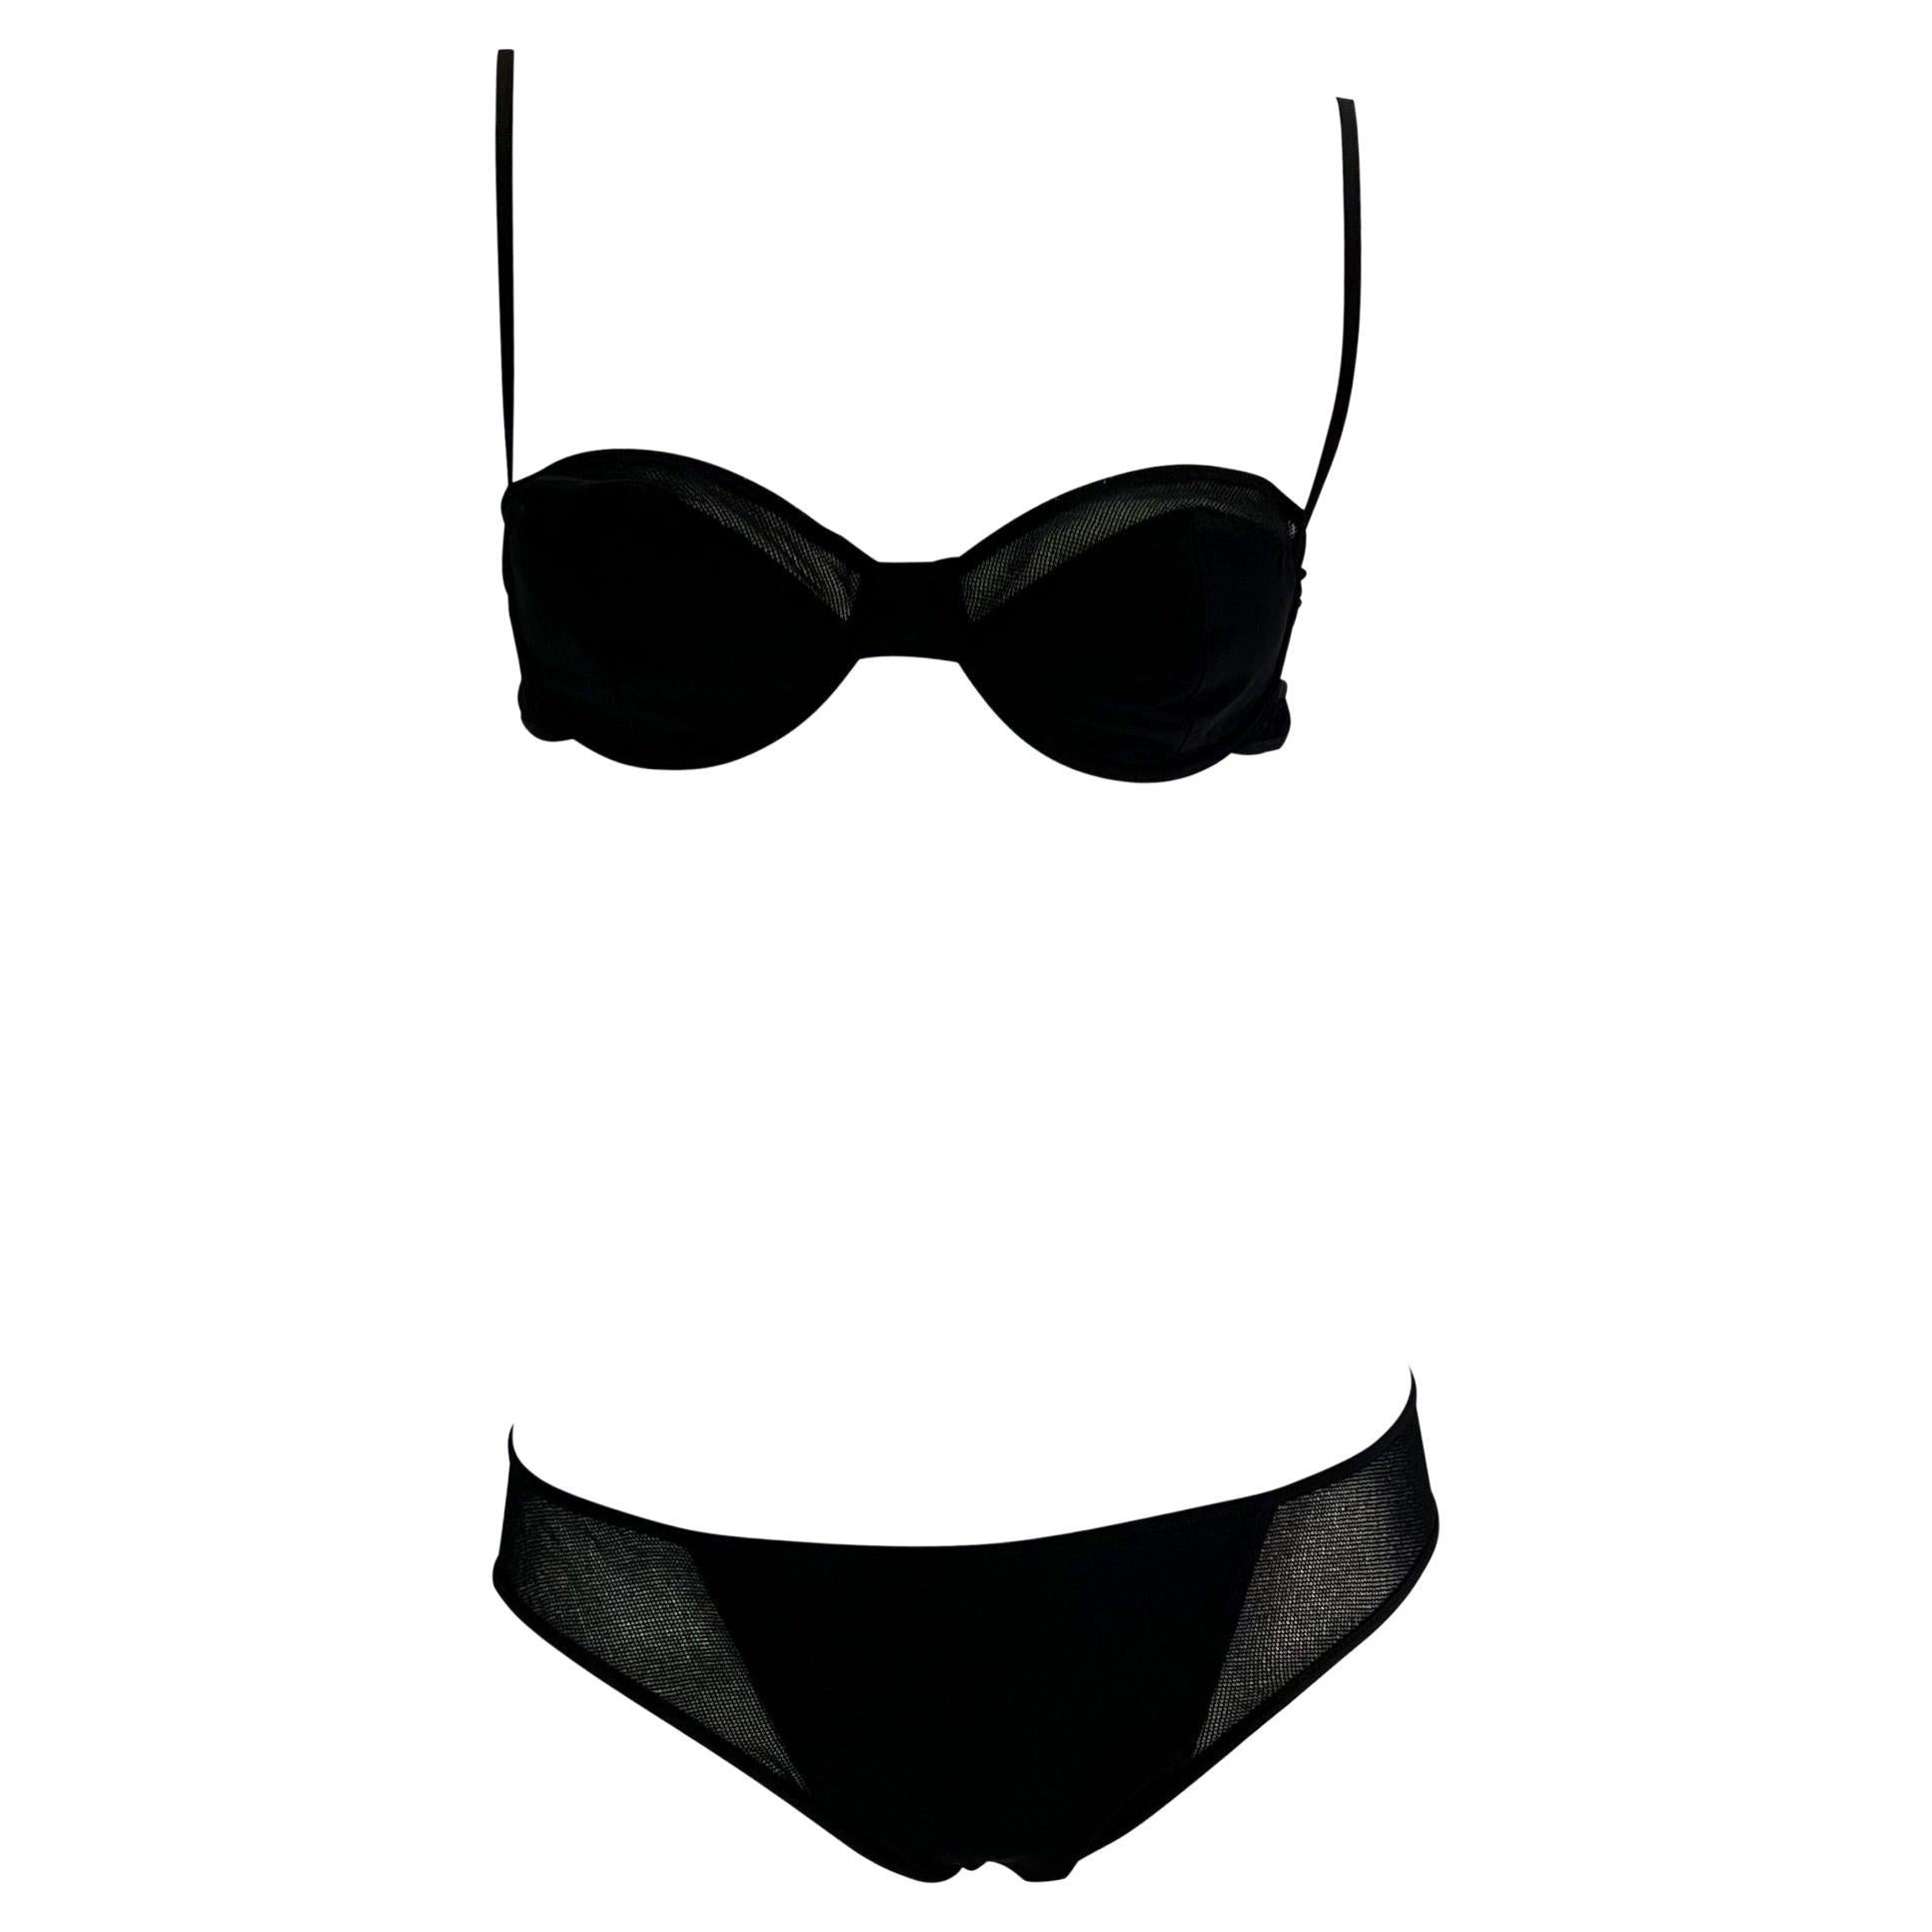 Presenting a sexy black mesh Gucci bikini, designed by Tom Ford. From the Spring/Summer 2002 collection, this new with tags bikini set consists of a bra style top and brief style bottoms. The top features mesh at the top of the cups and side straps,